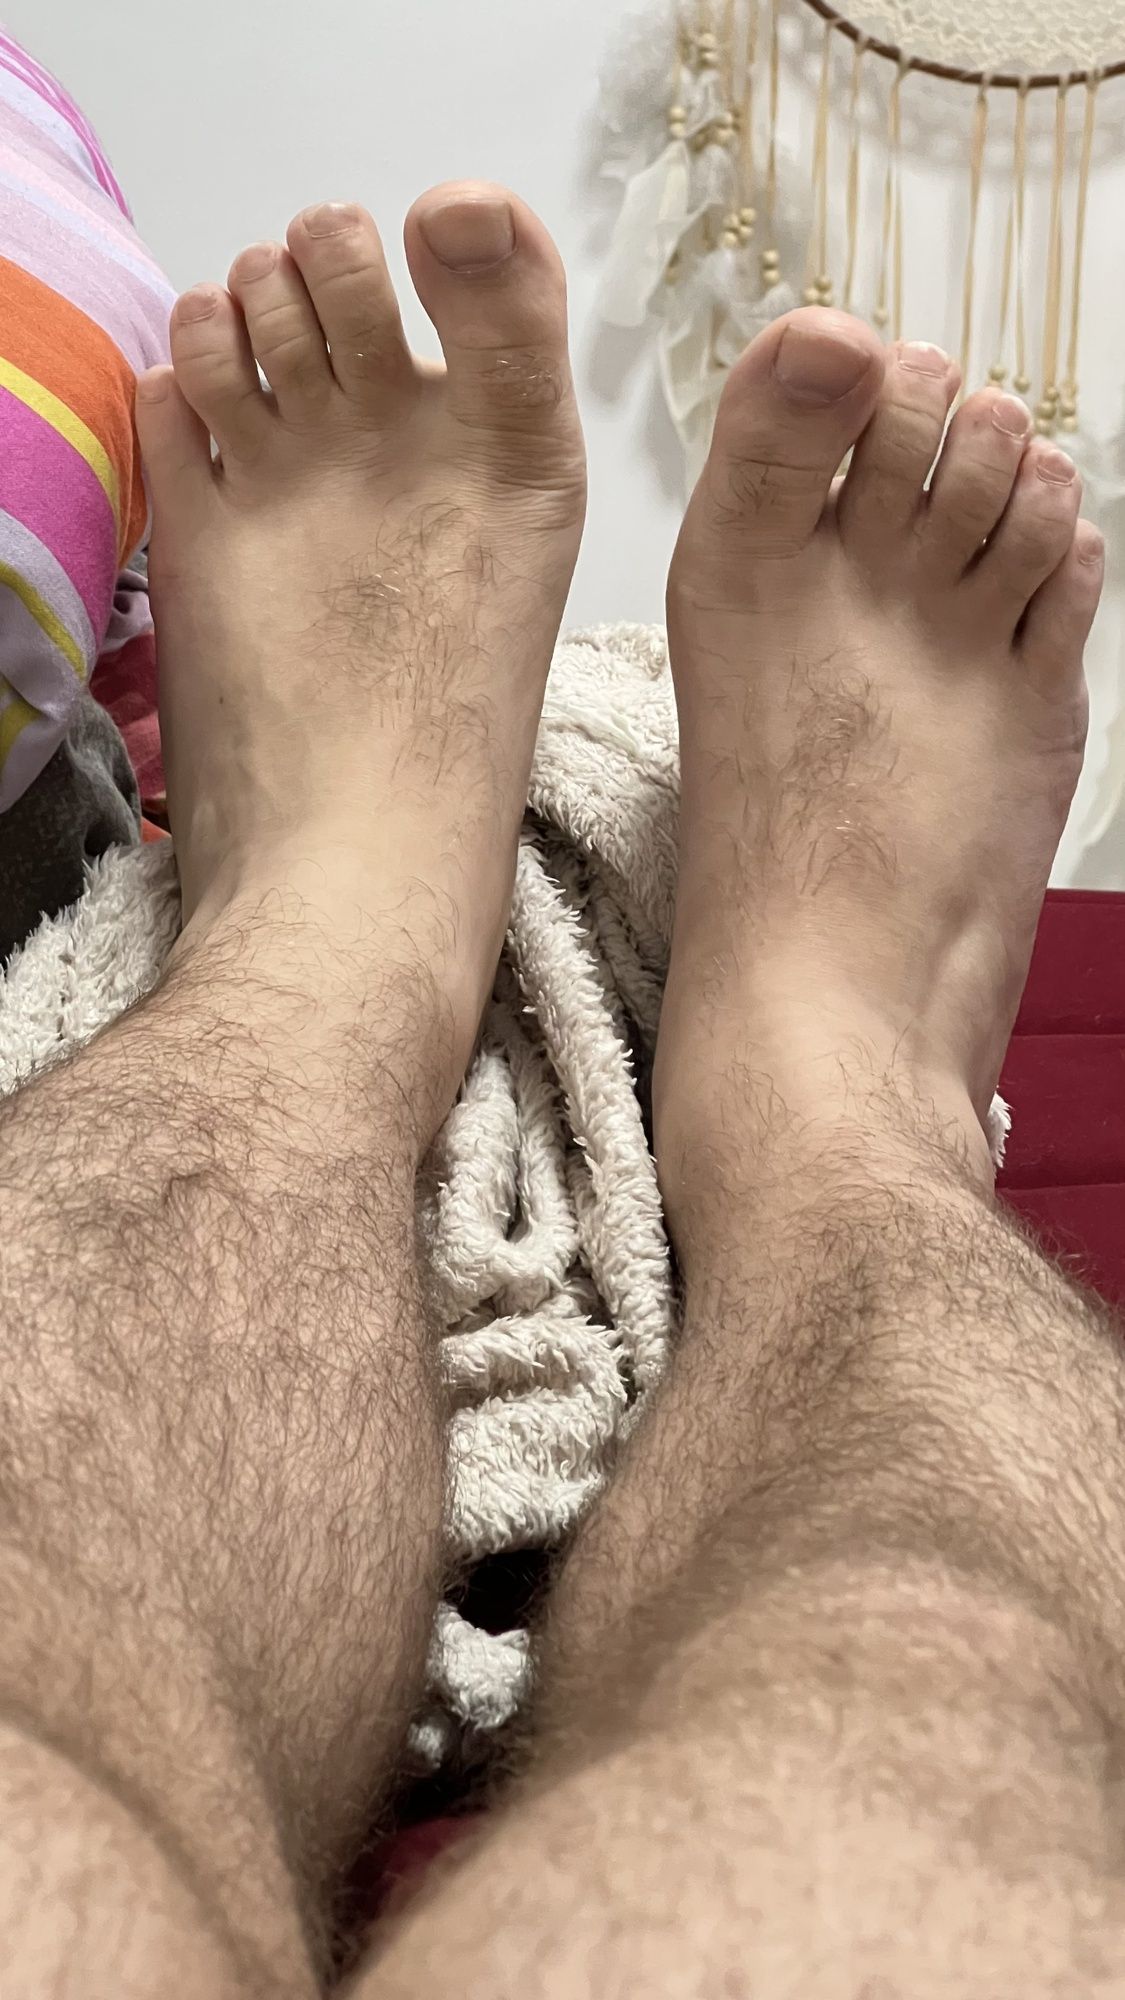 My feet and cock #2